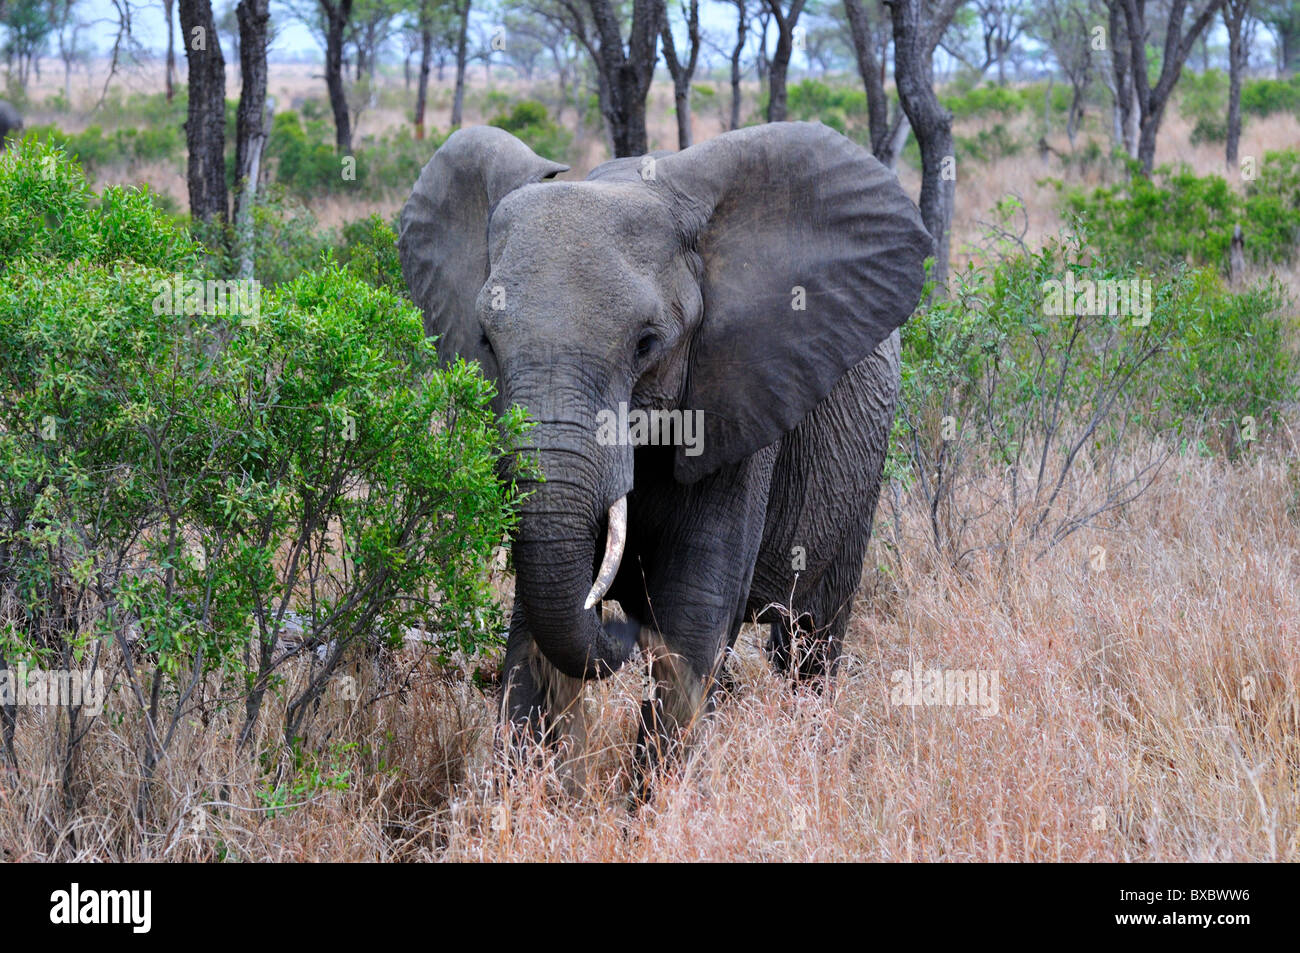 A young elephant bull walking by bushes. Kruger National Park, South Africa. Stock Photo